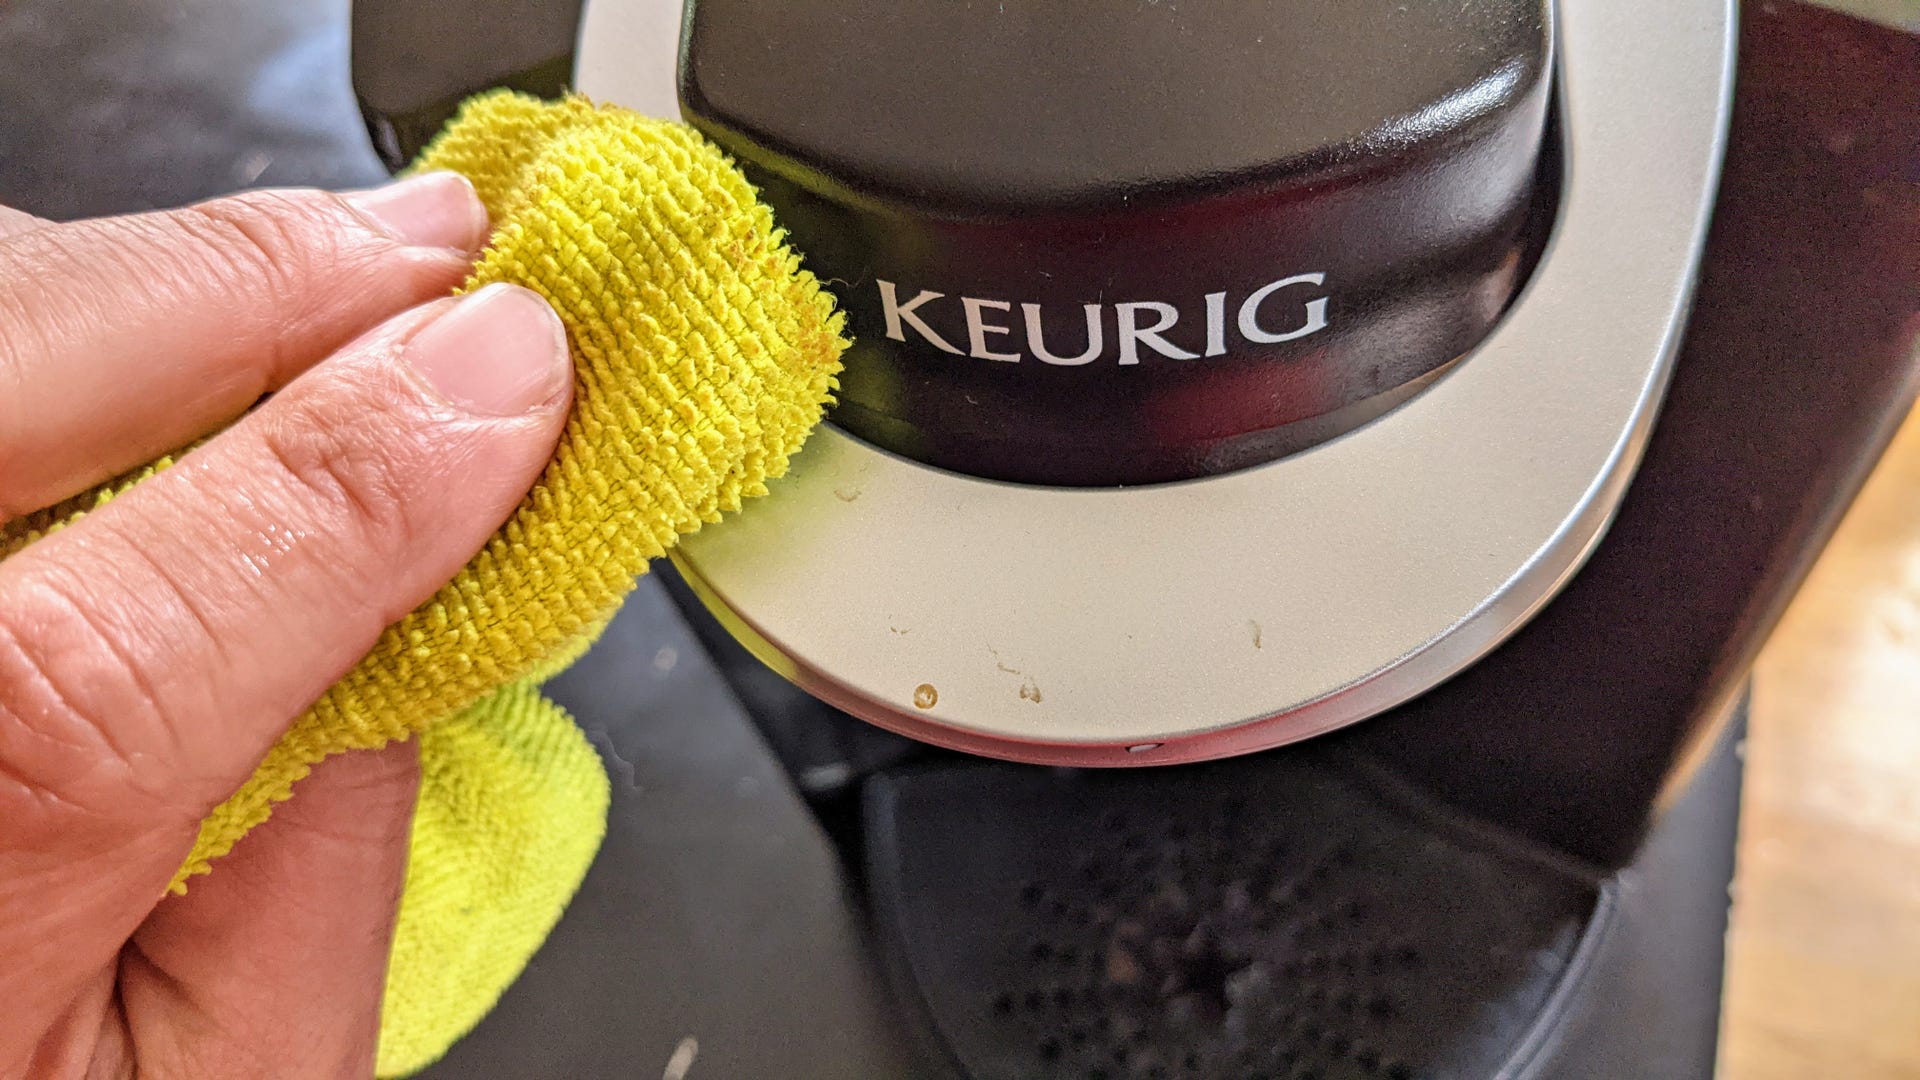 A hand wiping the handle of a Keurig with a cloth